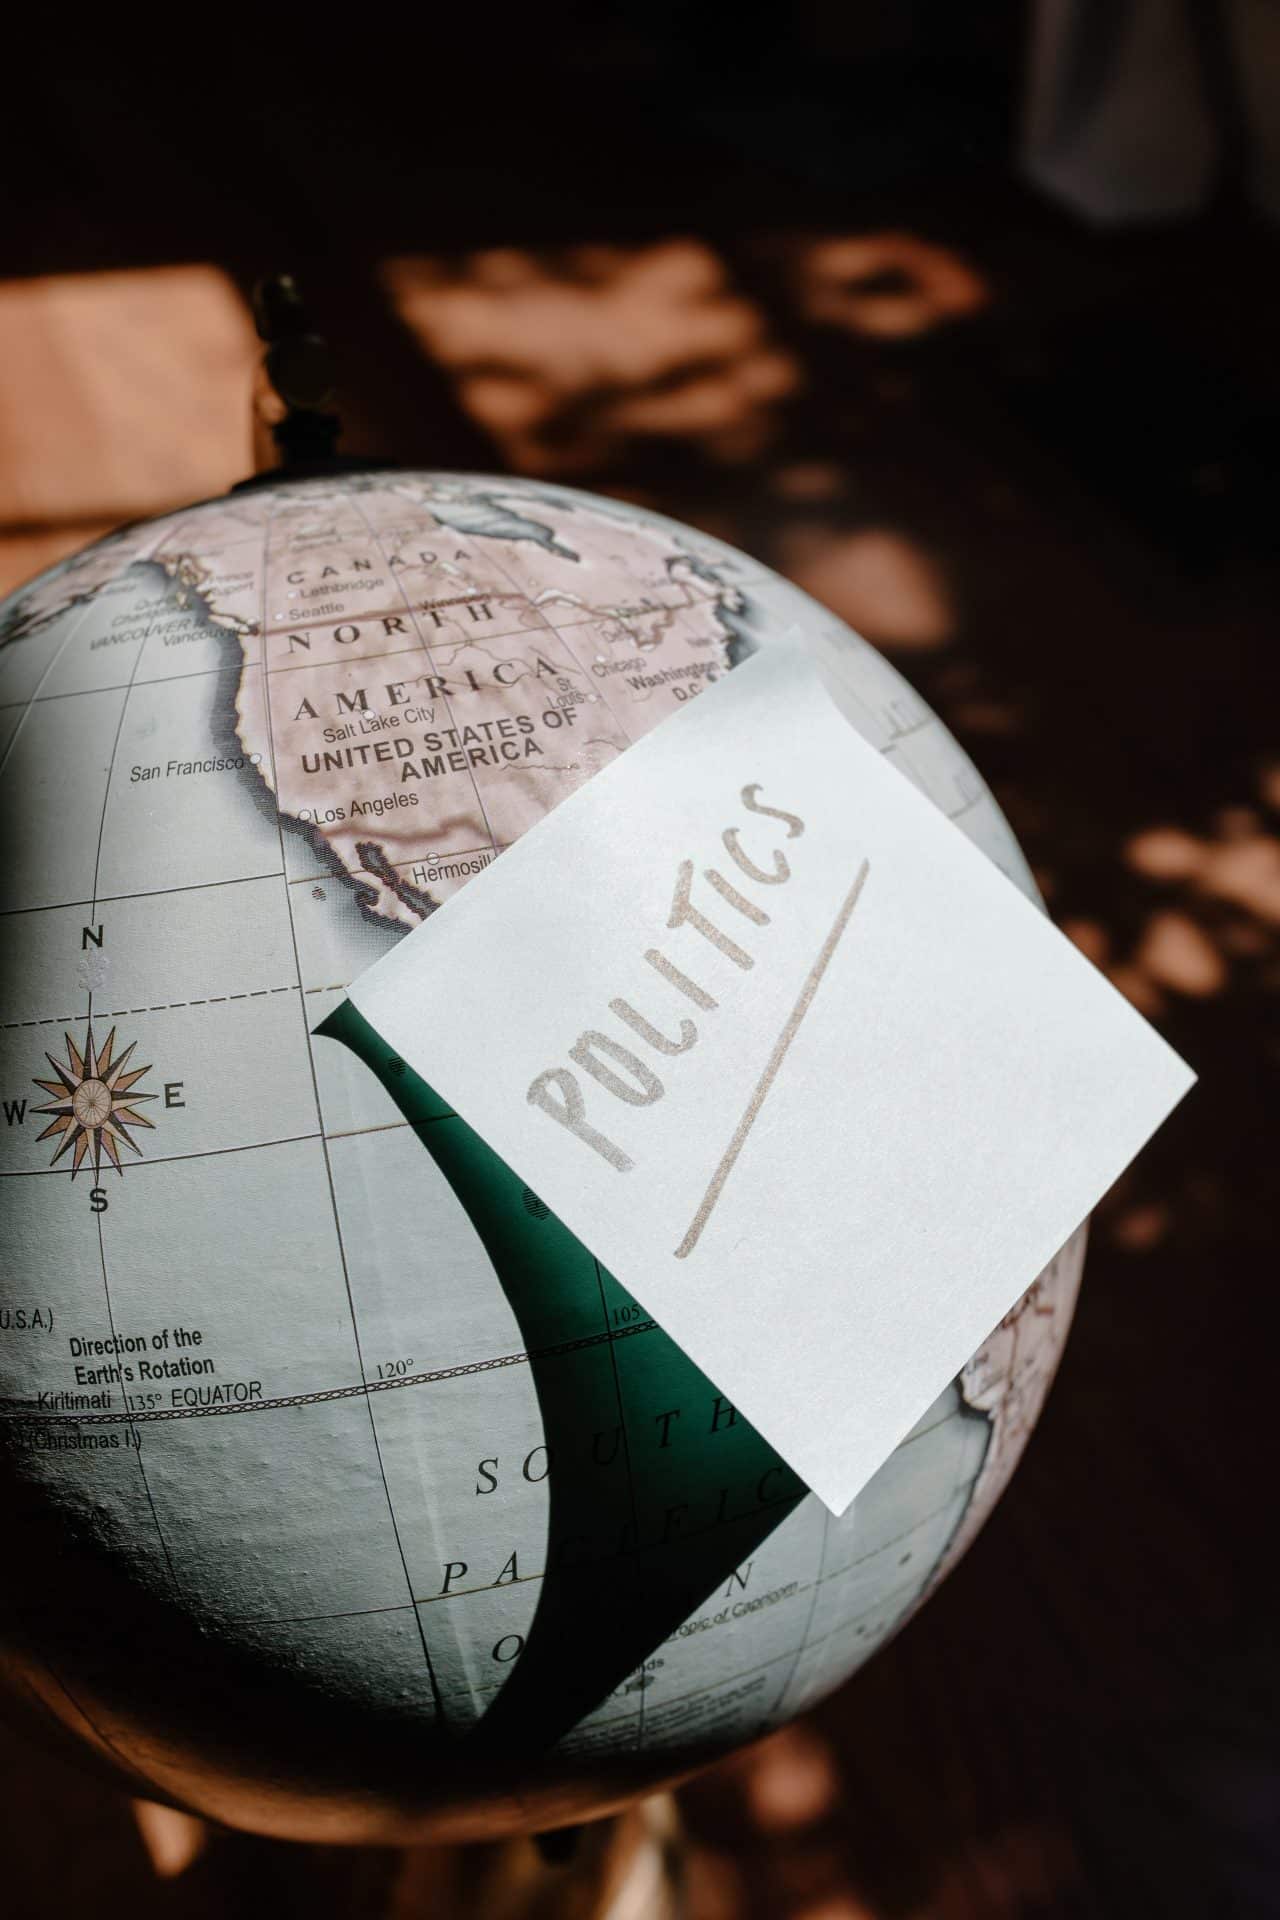 Image of a globe with Politics written on a post-it note